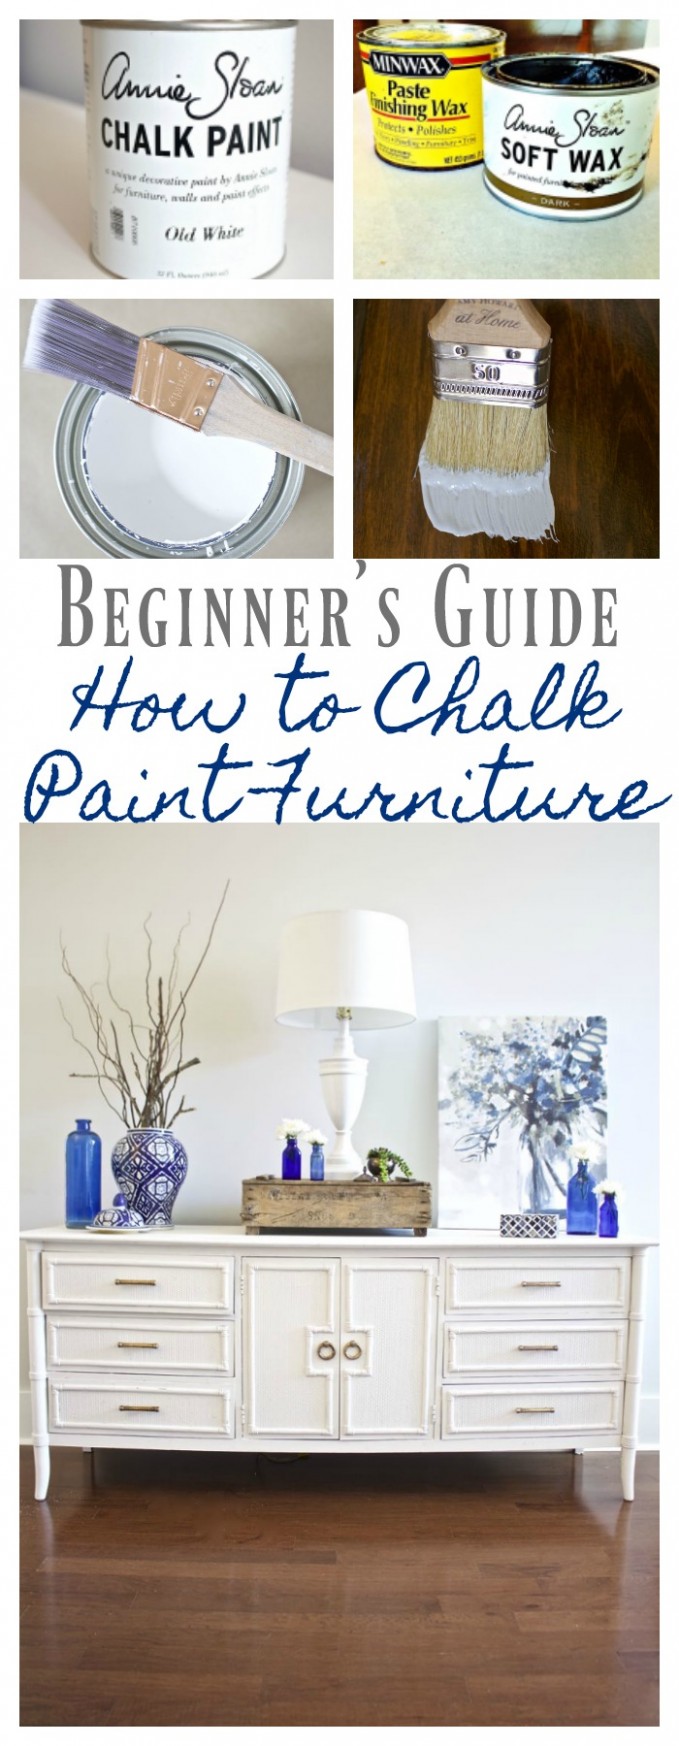 How To Chalk Paint Furniture Our Best Tips 10 Bees In A Pod Where To Buy Chalk Paint By Annie Sloan